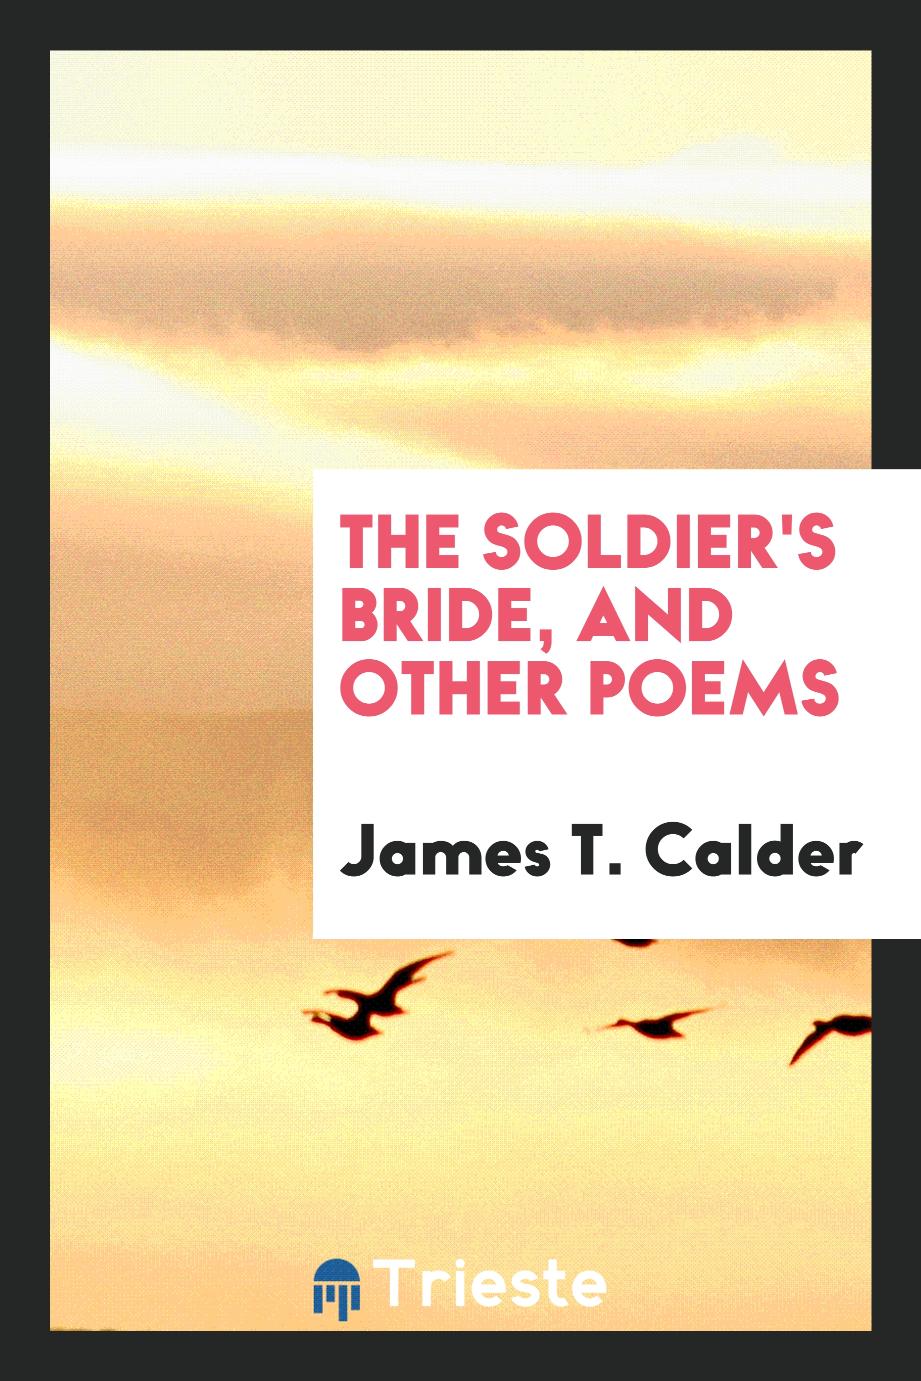 The Soldier's Bride, and Other Poems